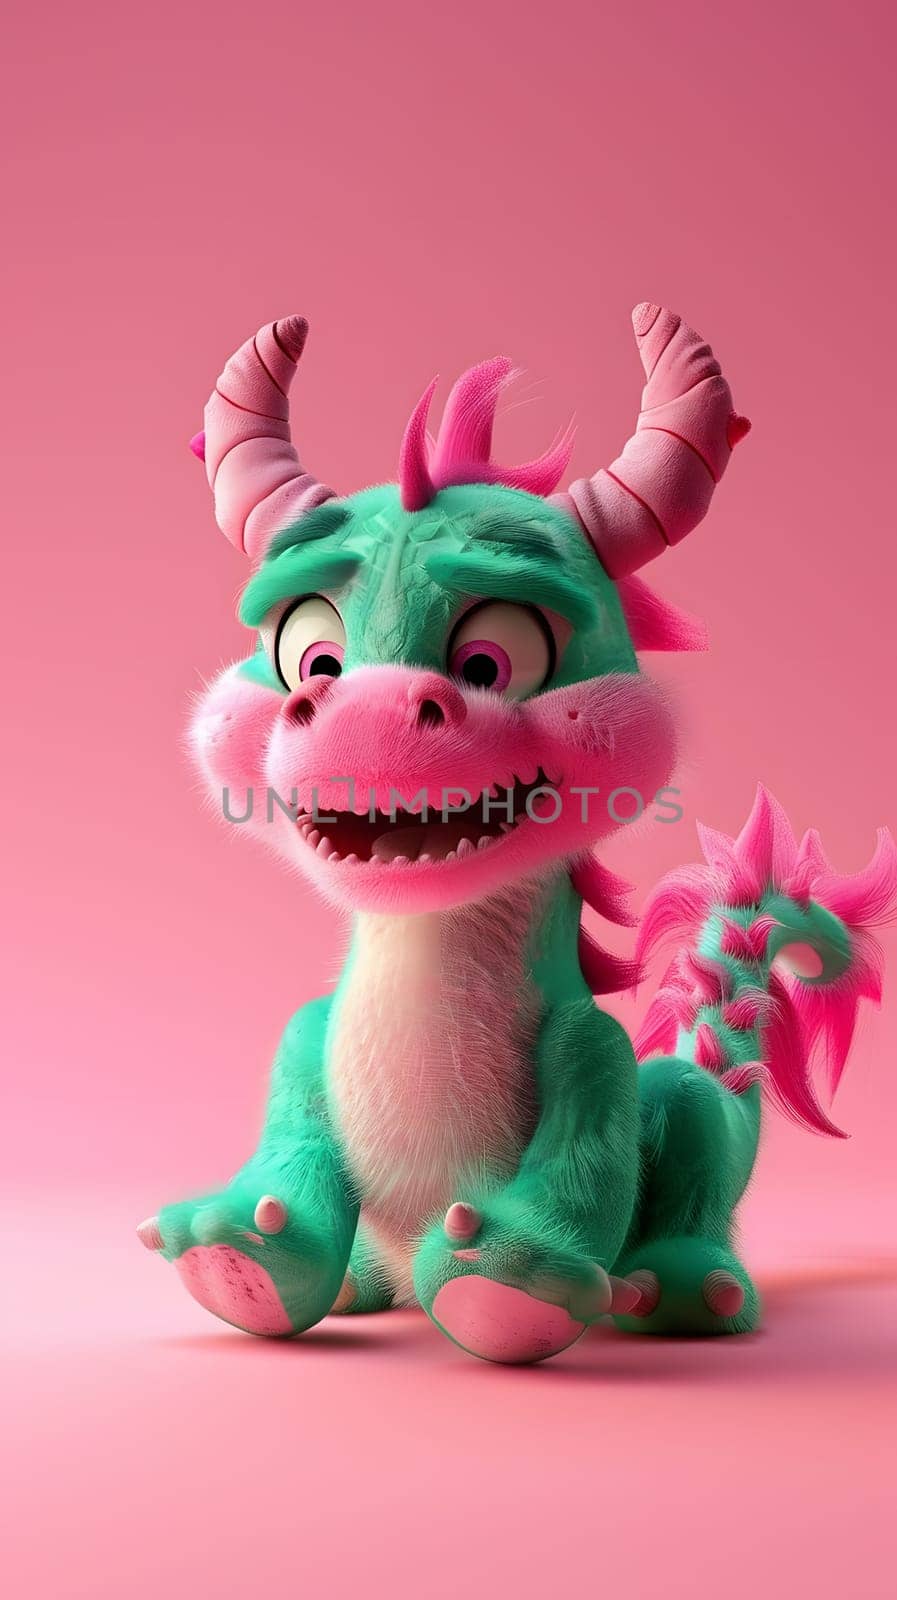 A plush green and pink toy dragon with horns is happily sitting on a magenta surface, its tail curled up and a big smile on its face, embodying a mythical creature with soft fur